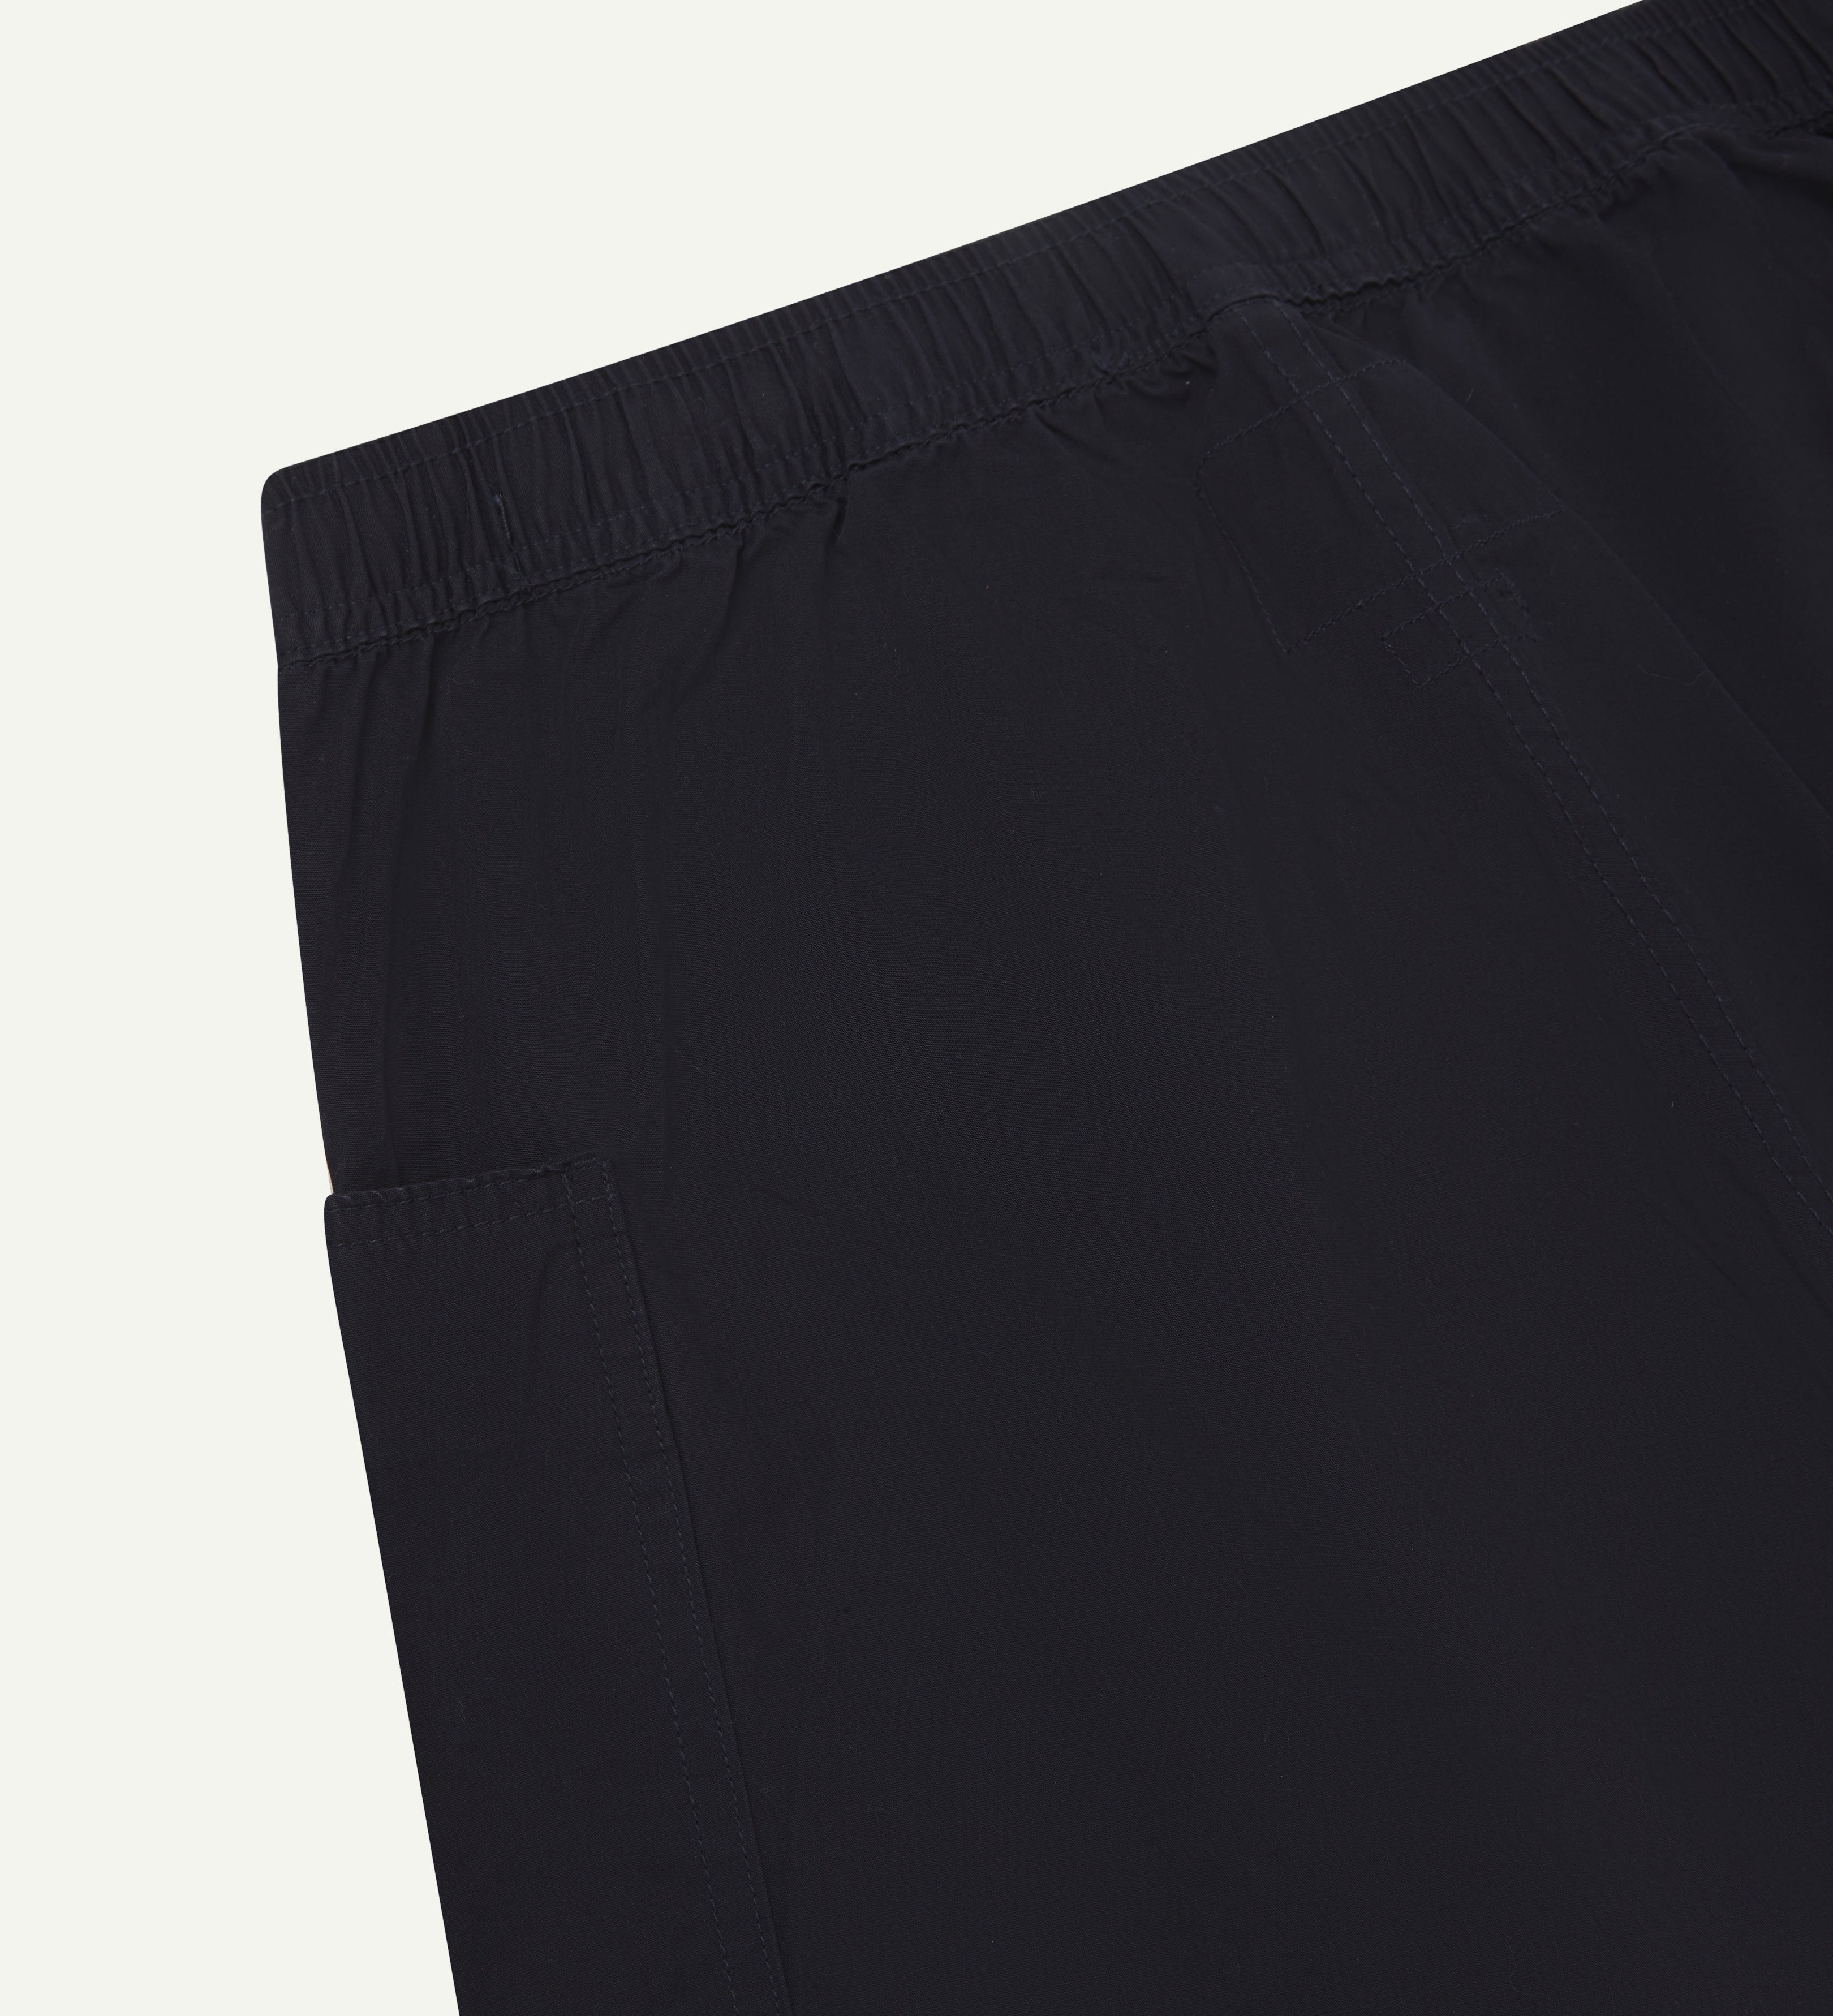 Close-up of the back of the lightweight organic midnight-blue cotton pants showing the elasticated waist.